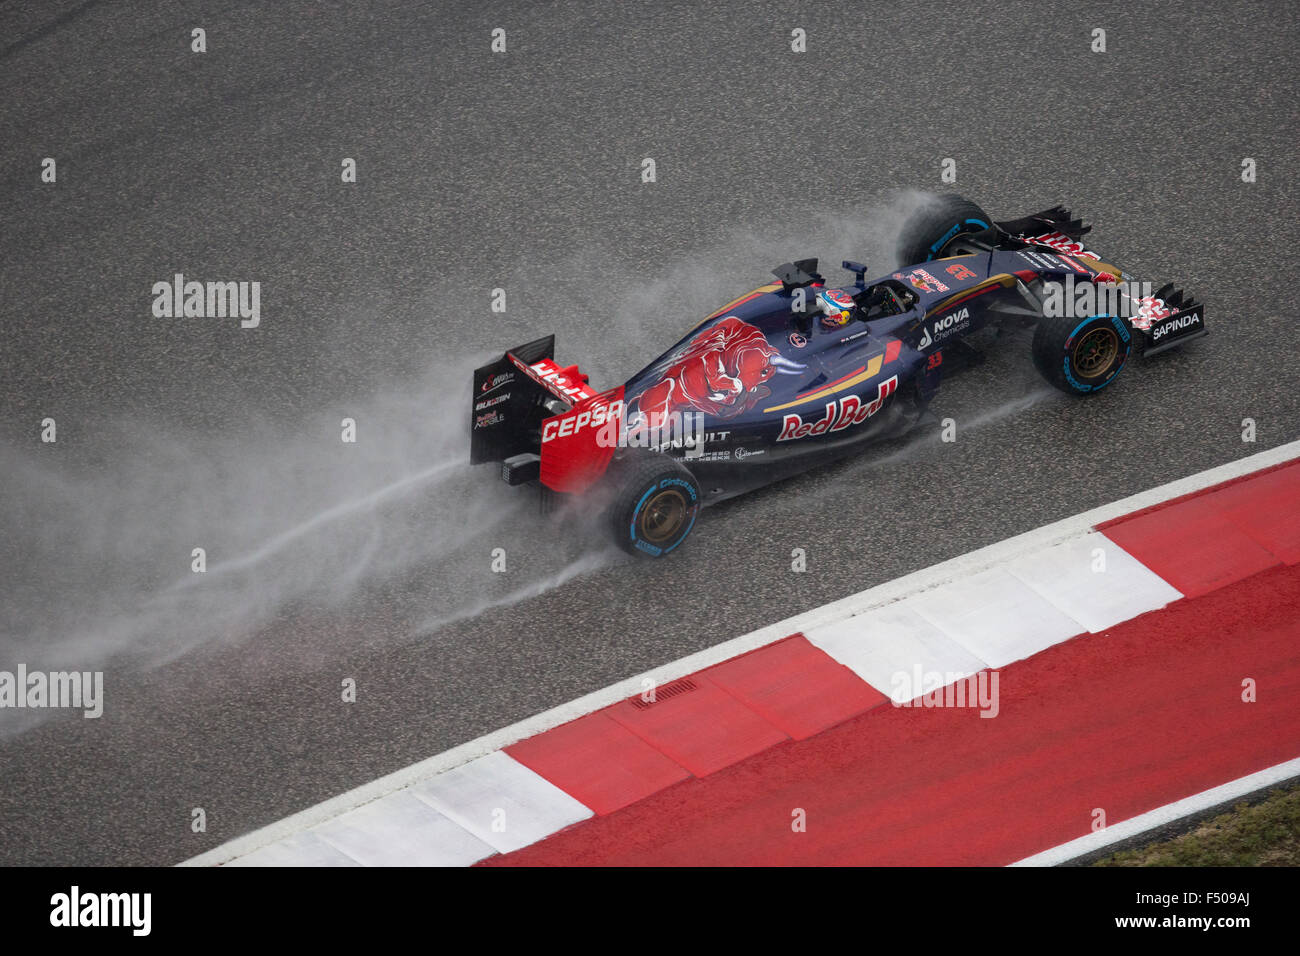 Austin, Texas USA October 25, 2015: Formula 1  driver Max Verstappen races in qualifying at a soaked Circuit of the Americas track in Sunday. Race officials are insistent on keeping Sunday's United States Grand Prix on schedule despite continued bad weather. Credit:  Bob Daemmrich/Alamy Live News Stock Photo